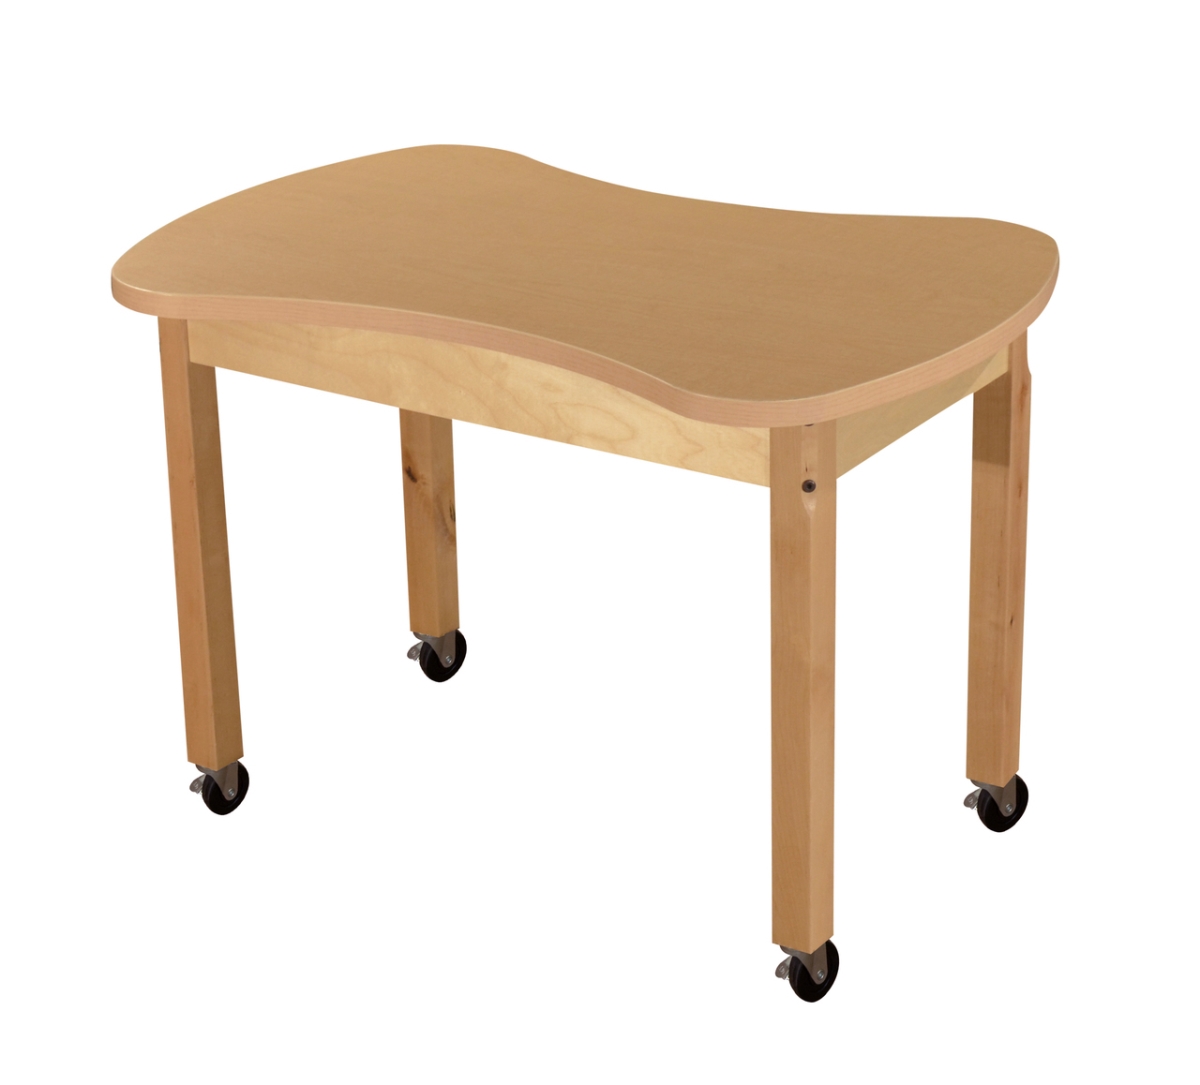 Picture of Wood Designs HPL2436C24C6 24 x 36 in. Mobile Synergy Junction, High Pressure Laminate Table with Hardwood Legs- 24 in.